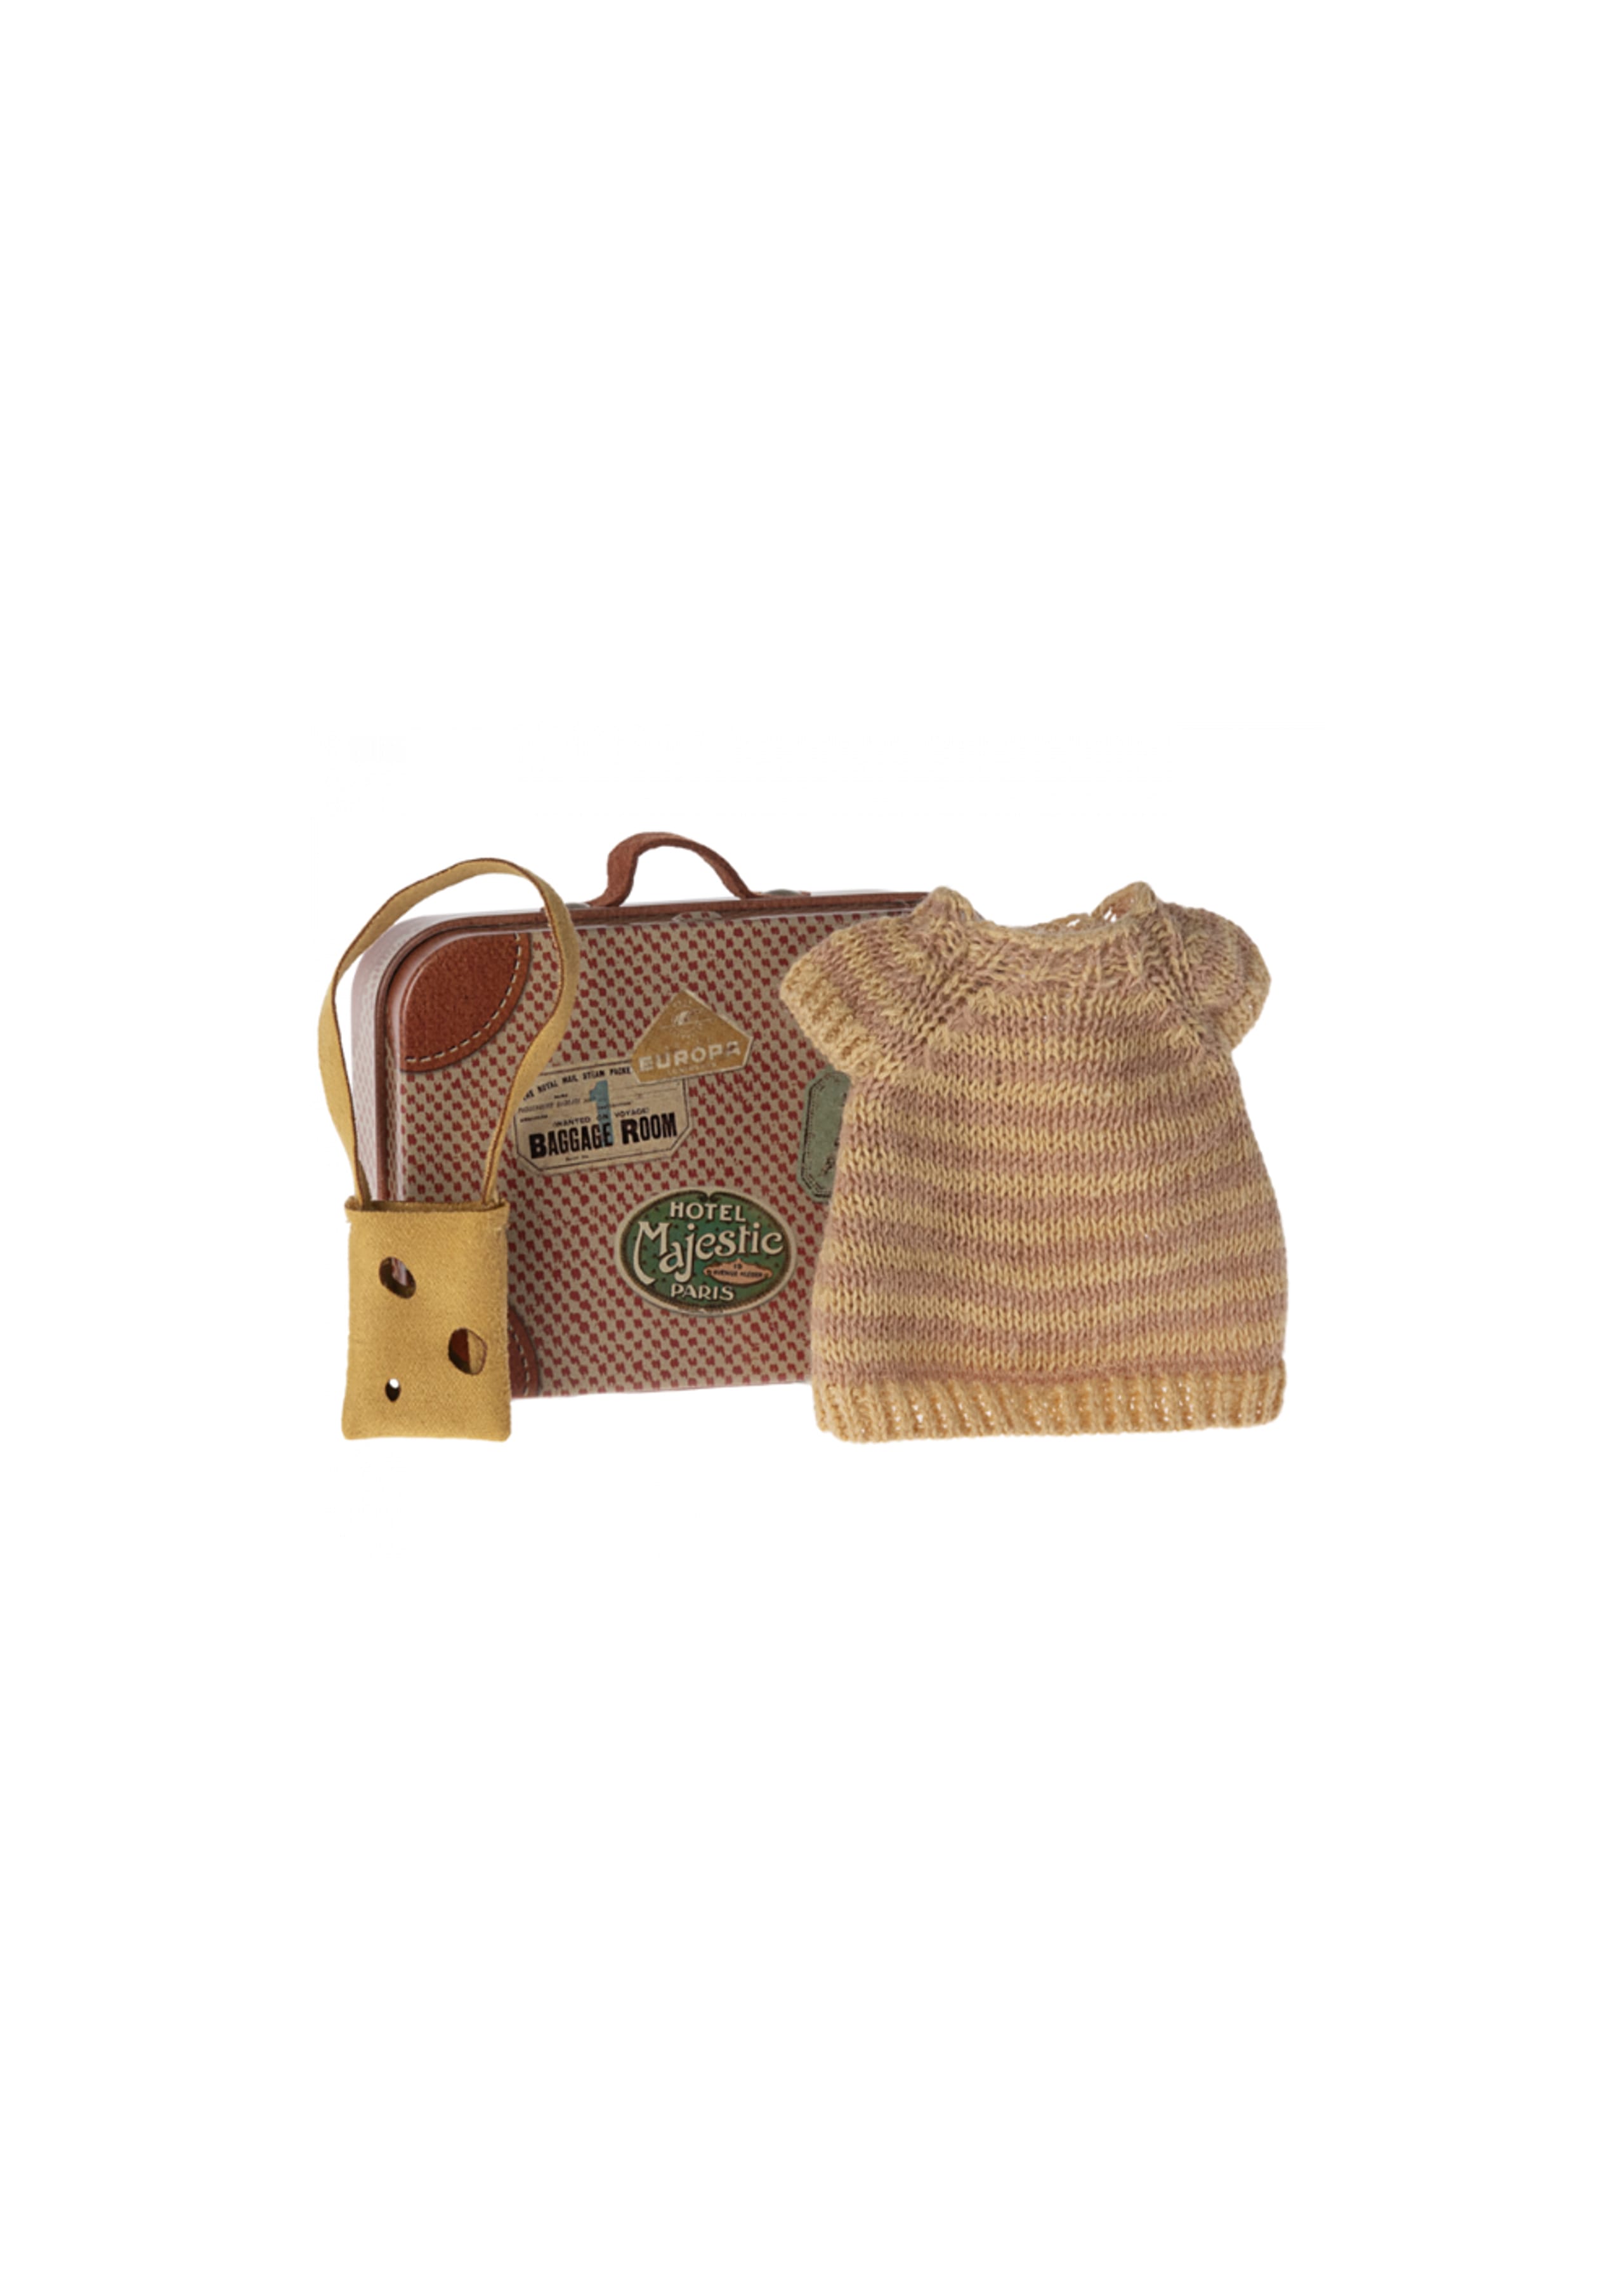 Maileg - Speelgoed - Knitted dress and bag in suitcase - Big sister mouse - Brown - yellow